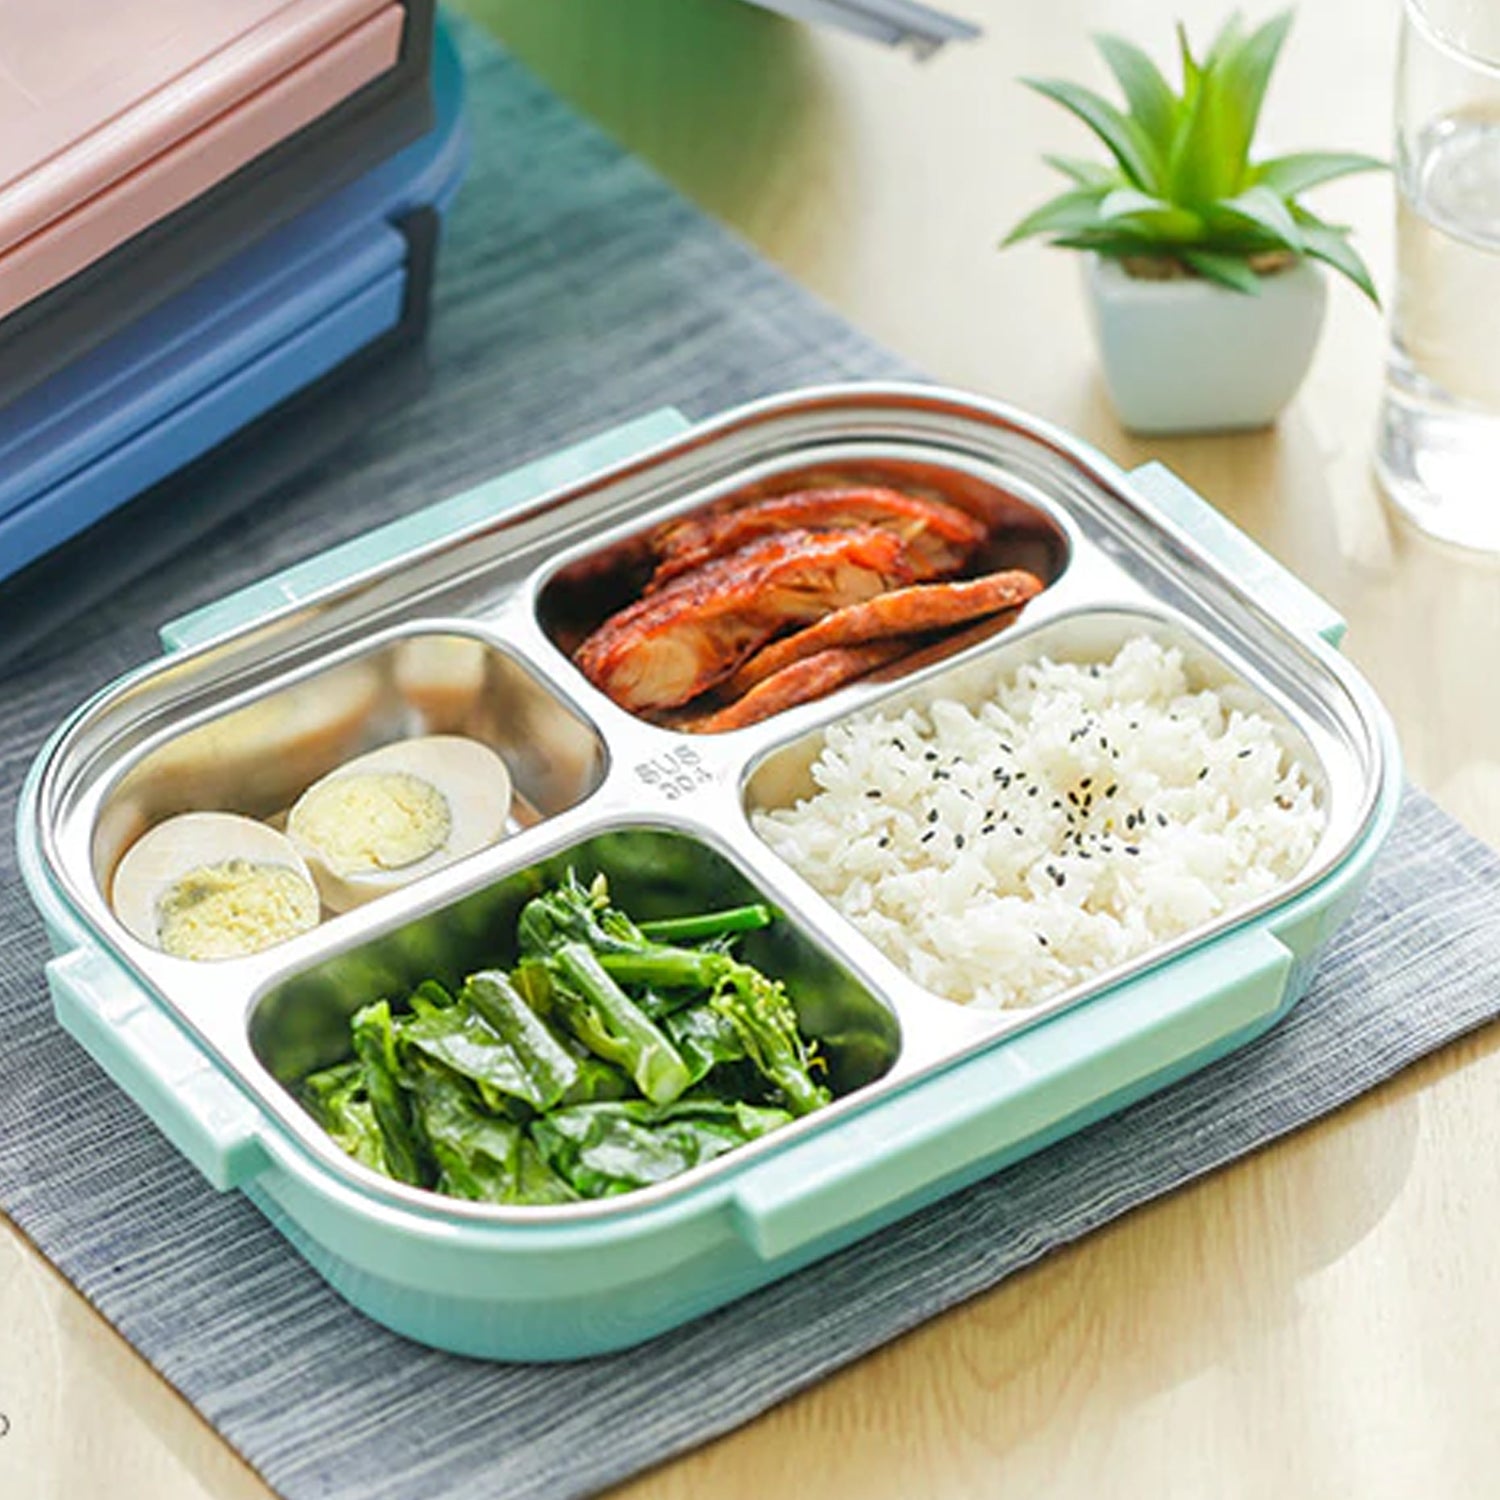 2043 White Transparent 4 Compartment Lunch Box for Kids and adults, Stainless Steel Lunch Box with 4 Compartments. 